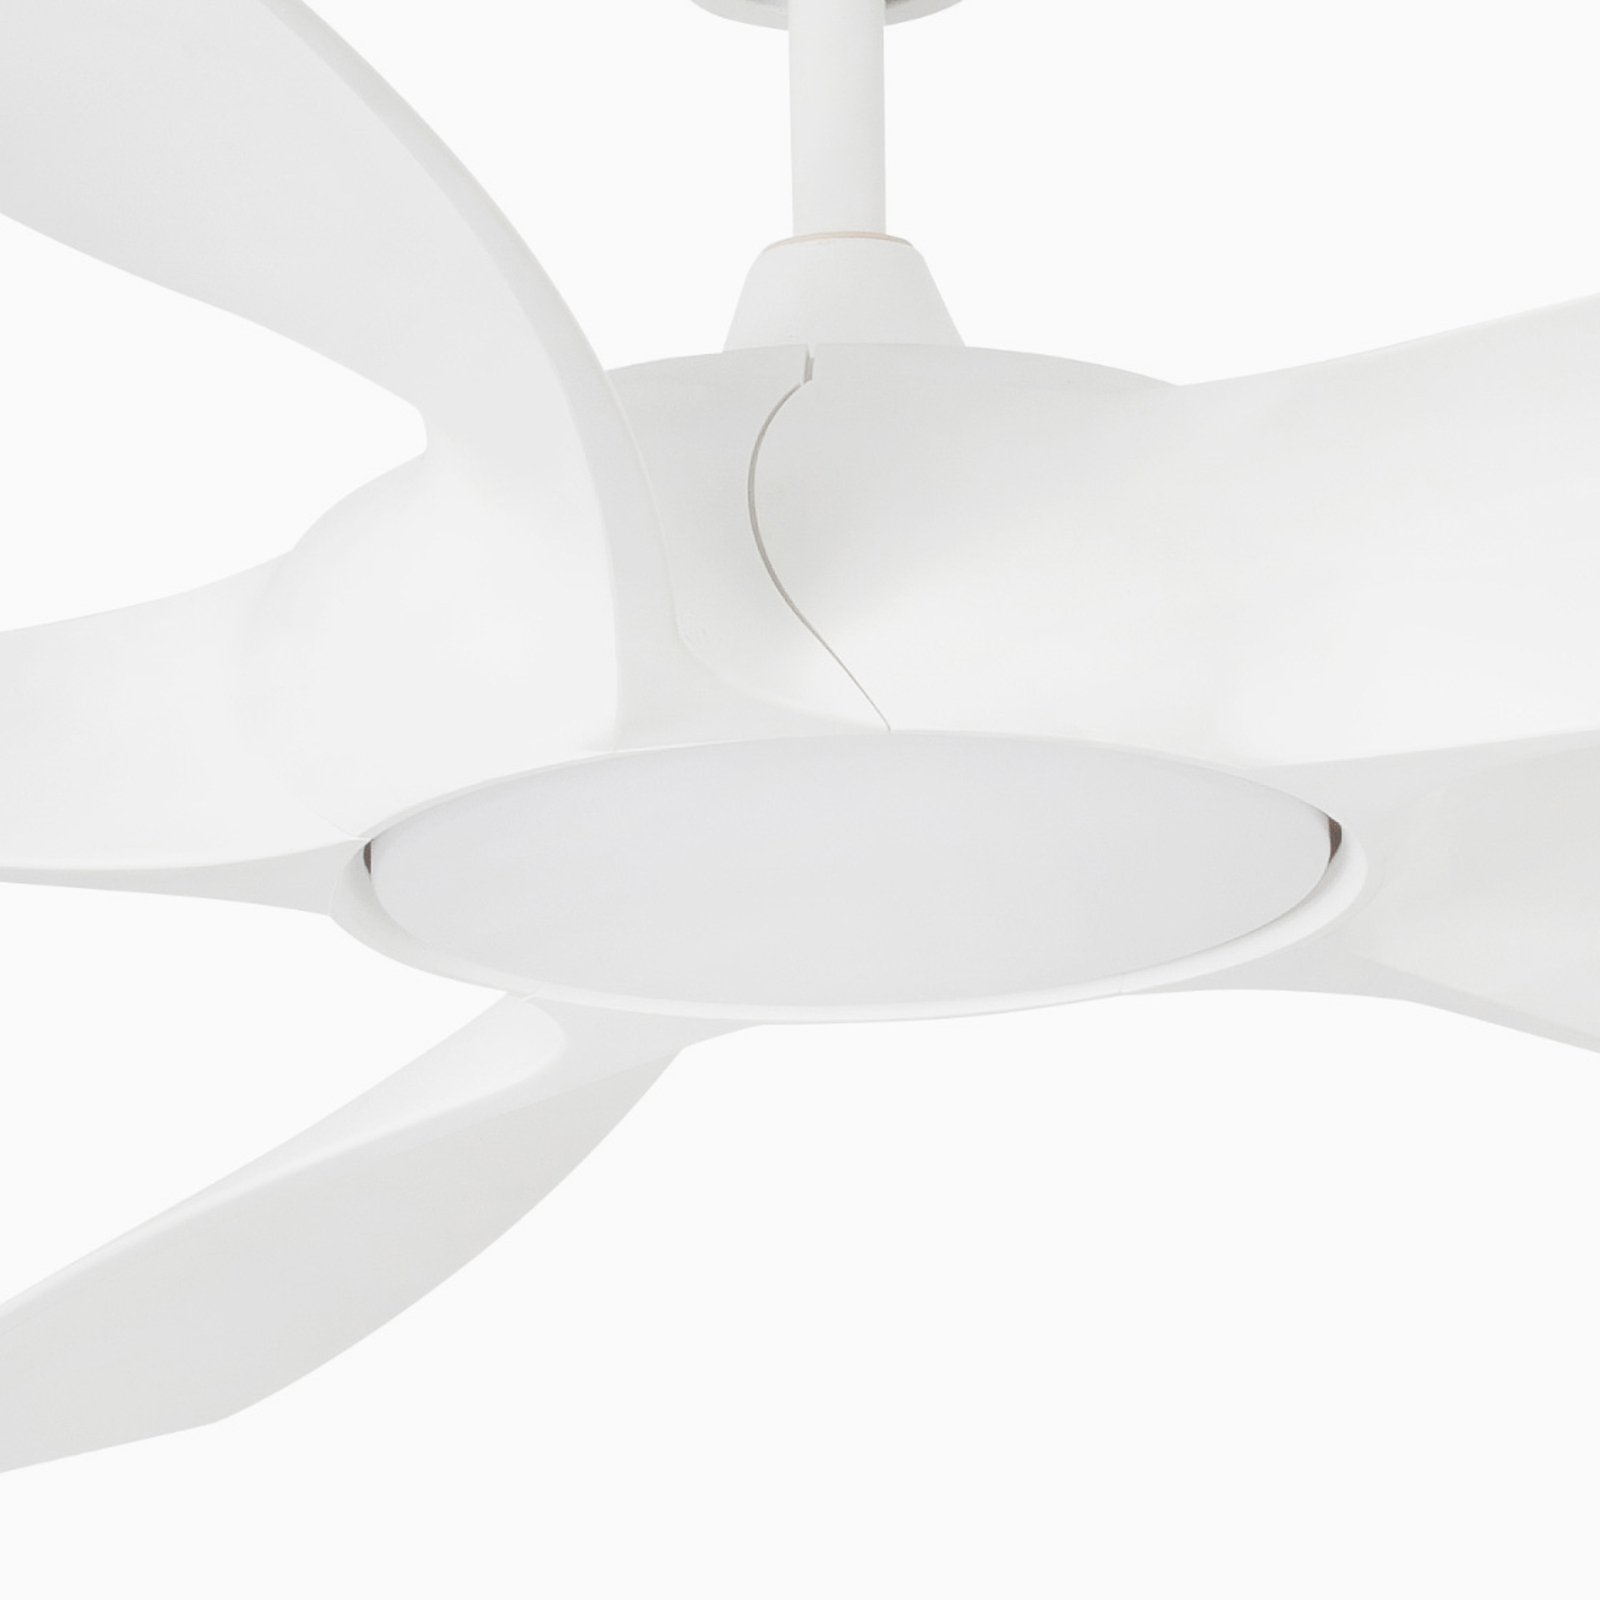 Cocos L ceiling fan with an LED light, DC, white